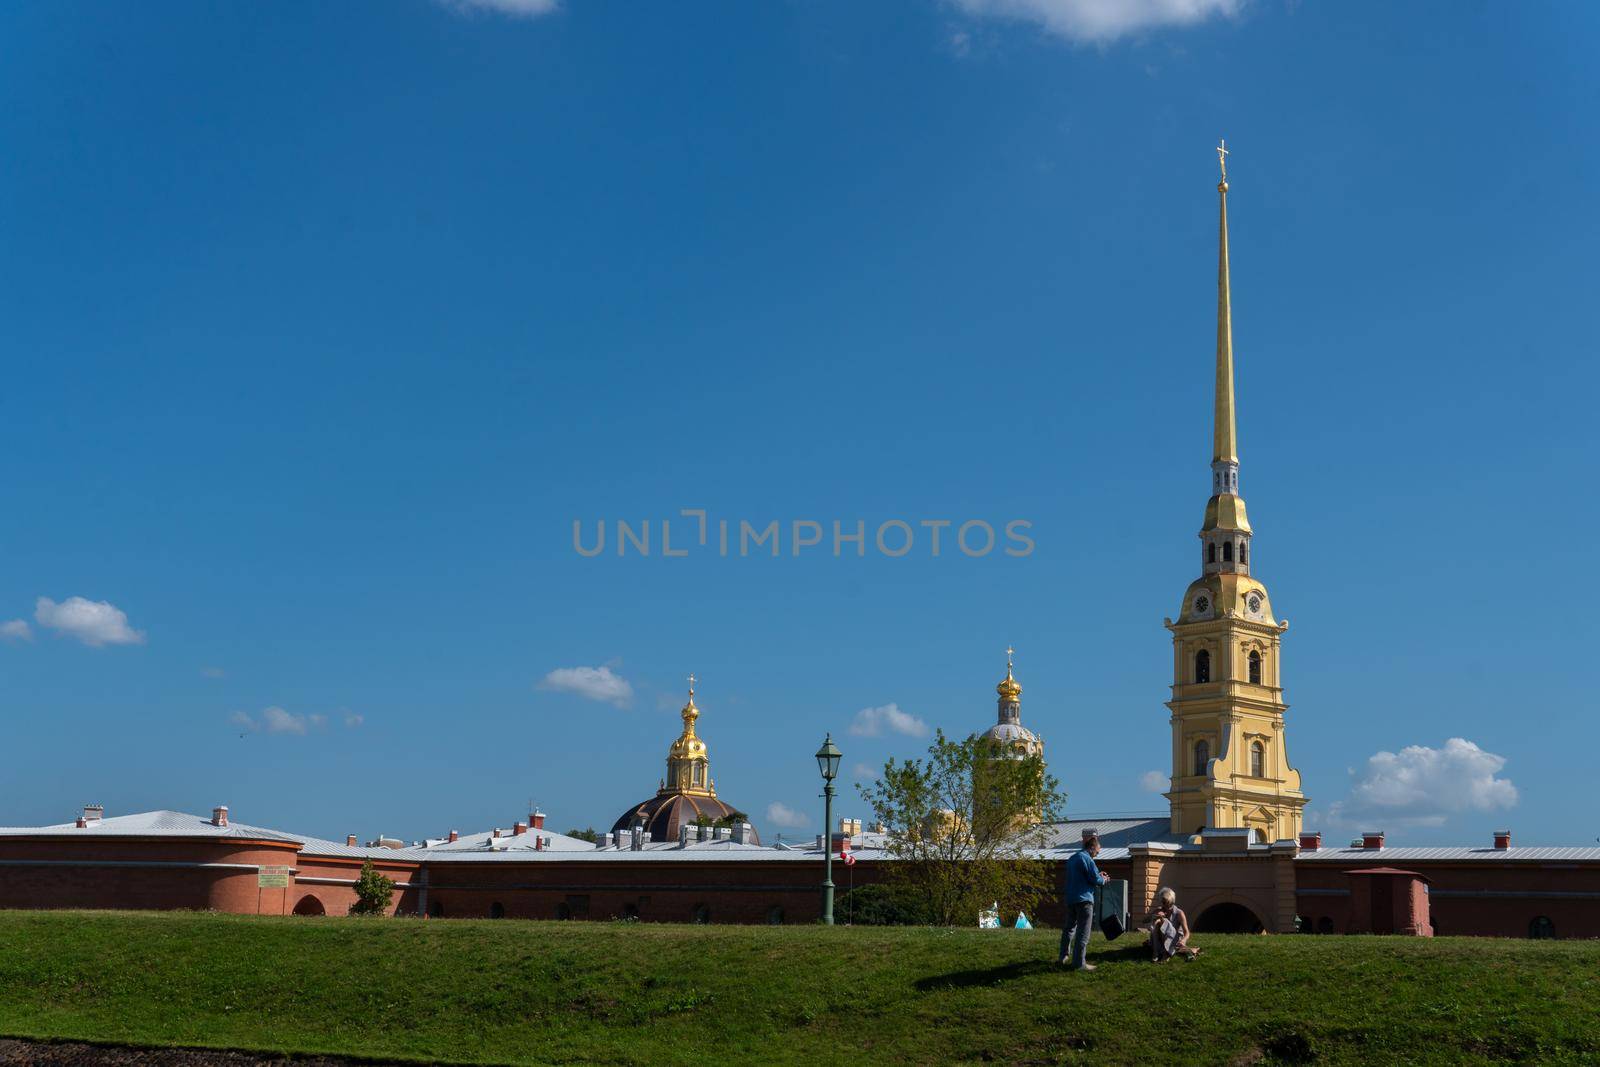 RUSSIA, PETERSBURG - AUG 20, 2022: fortress view petersburg peter russia saint island tourism river, for landscape city in water for blue europe, outdoor wall. Famous urban, by 89167702191